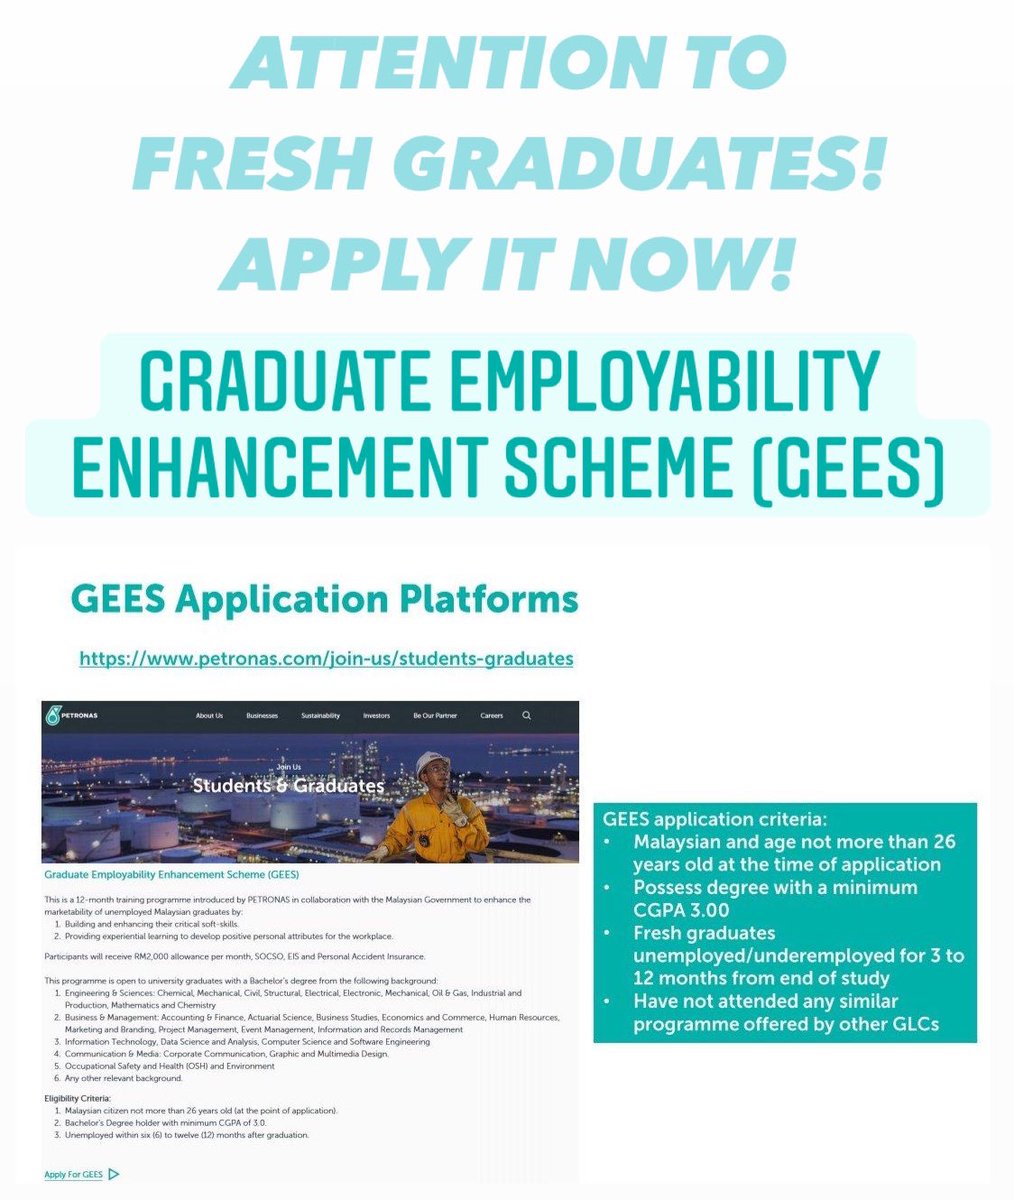 Koko On Twitter Job Opportunity Alert Attention To Fresh Graduates Petronas Has A Job Experience For You Under Graduate Employability Enhancement Scheme Gees It Would Be An Amazing Journey For The Fresh Graduates